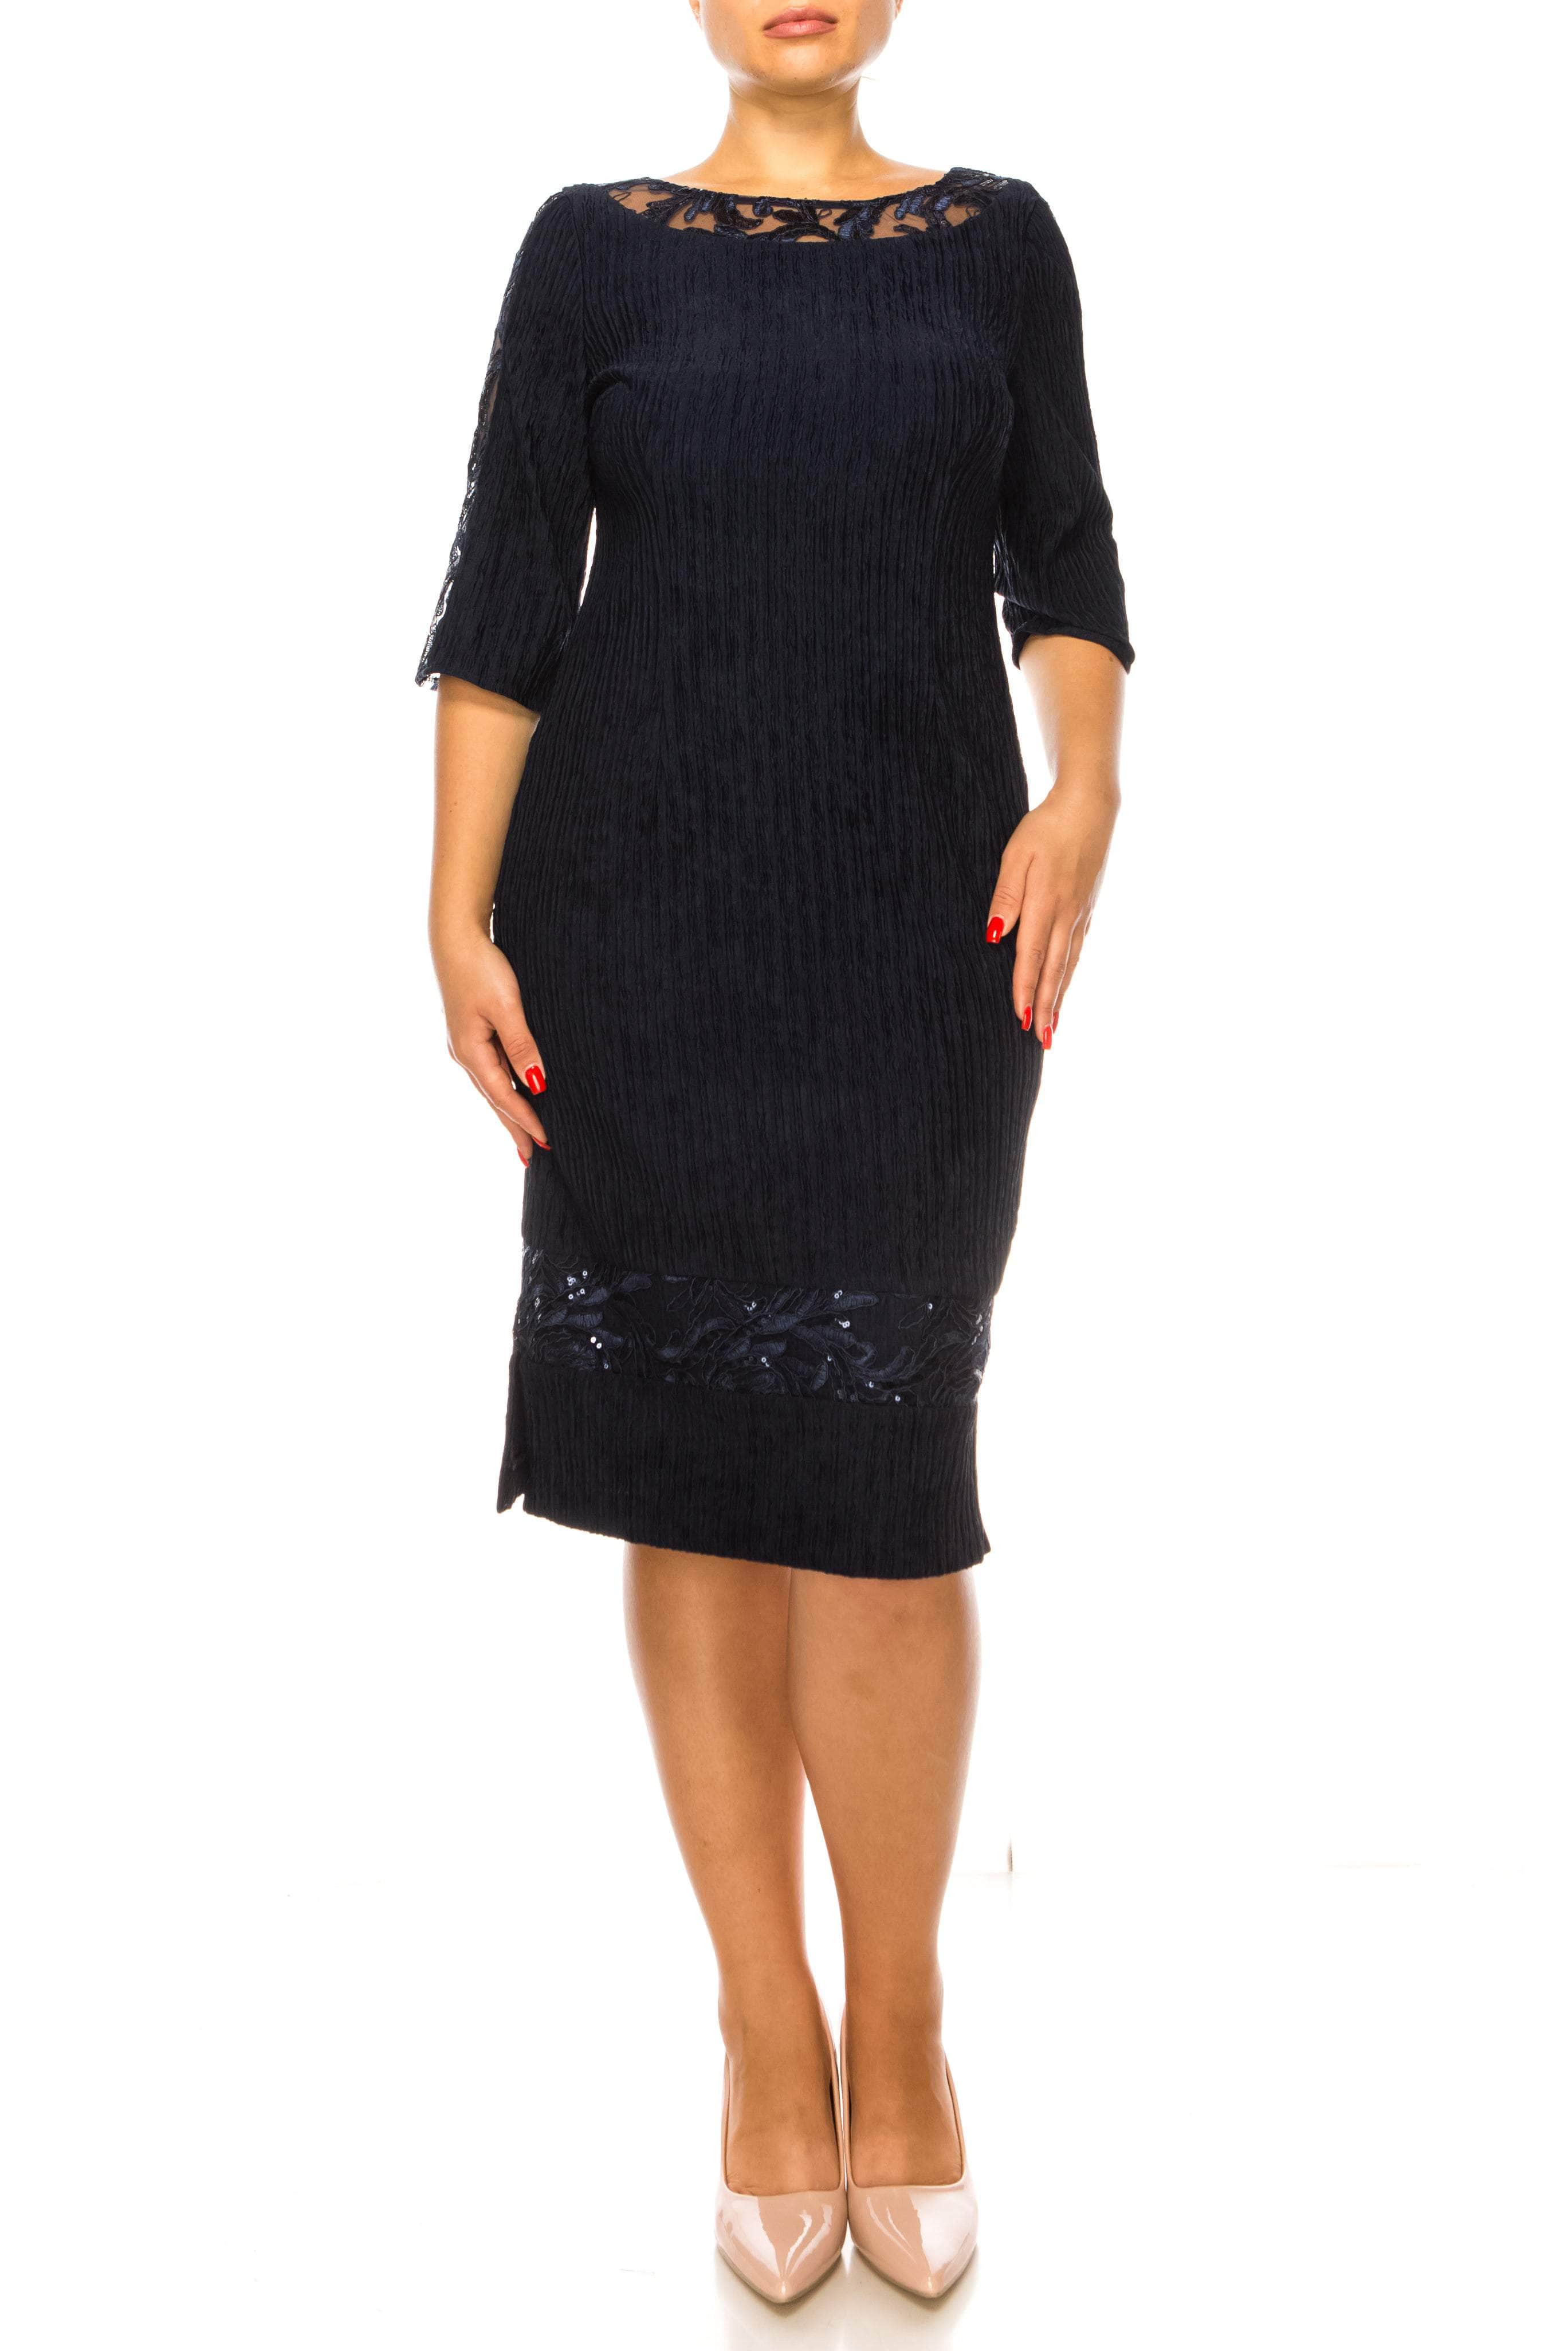 Image of New Yorker's Apparel 4020 - Embroidered Sequin Dress